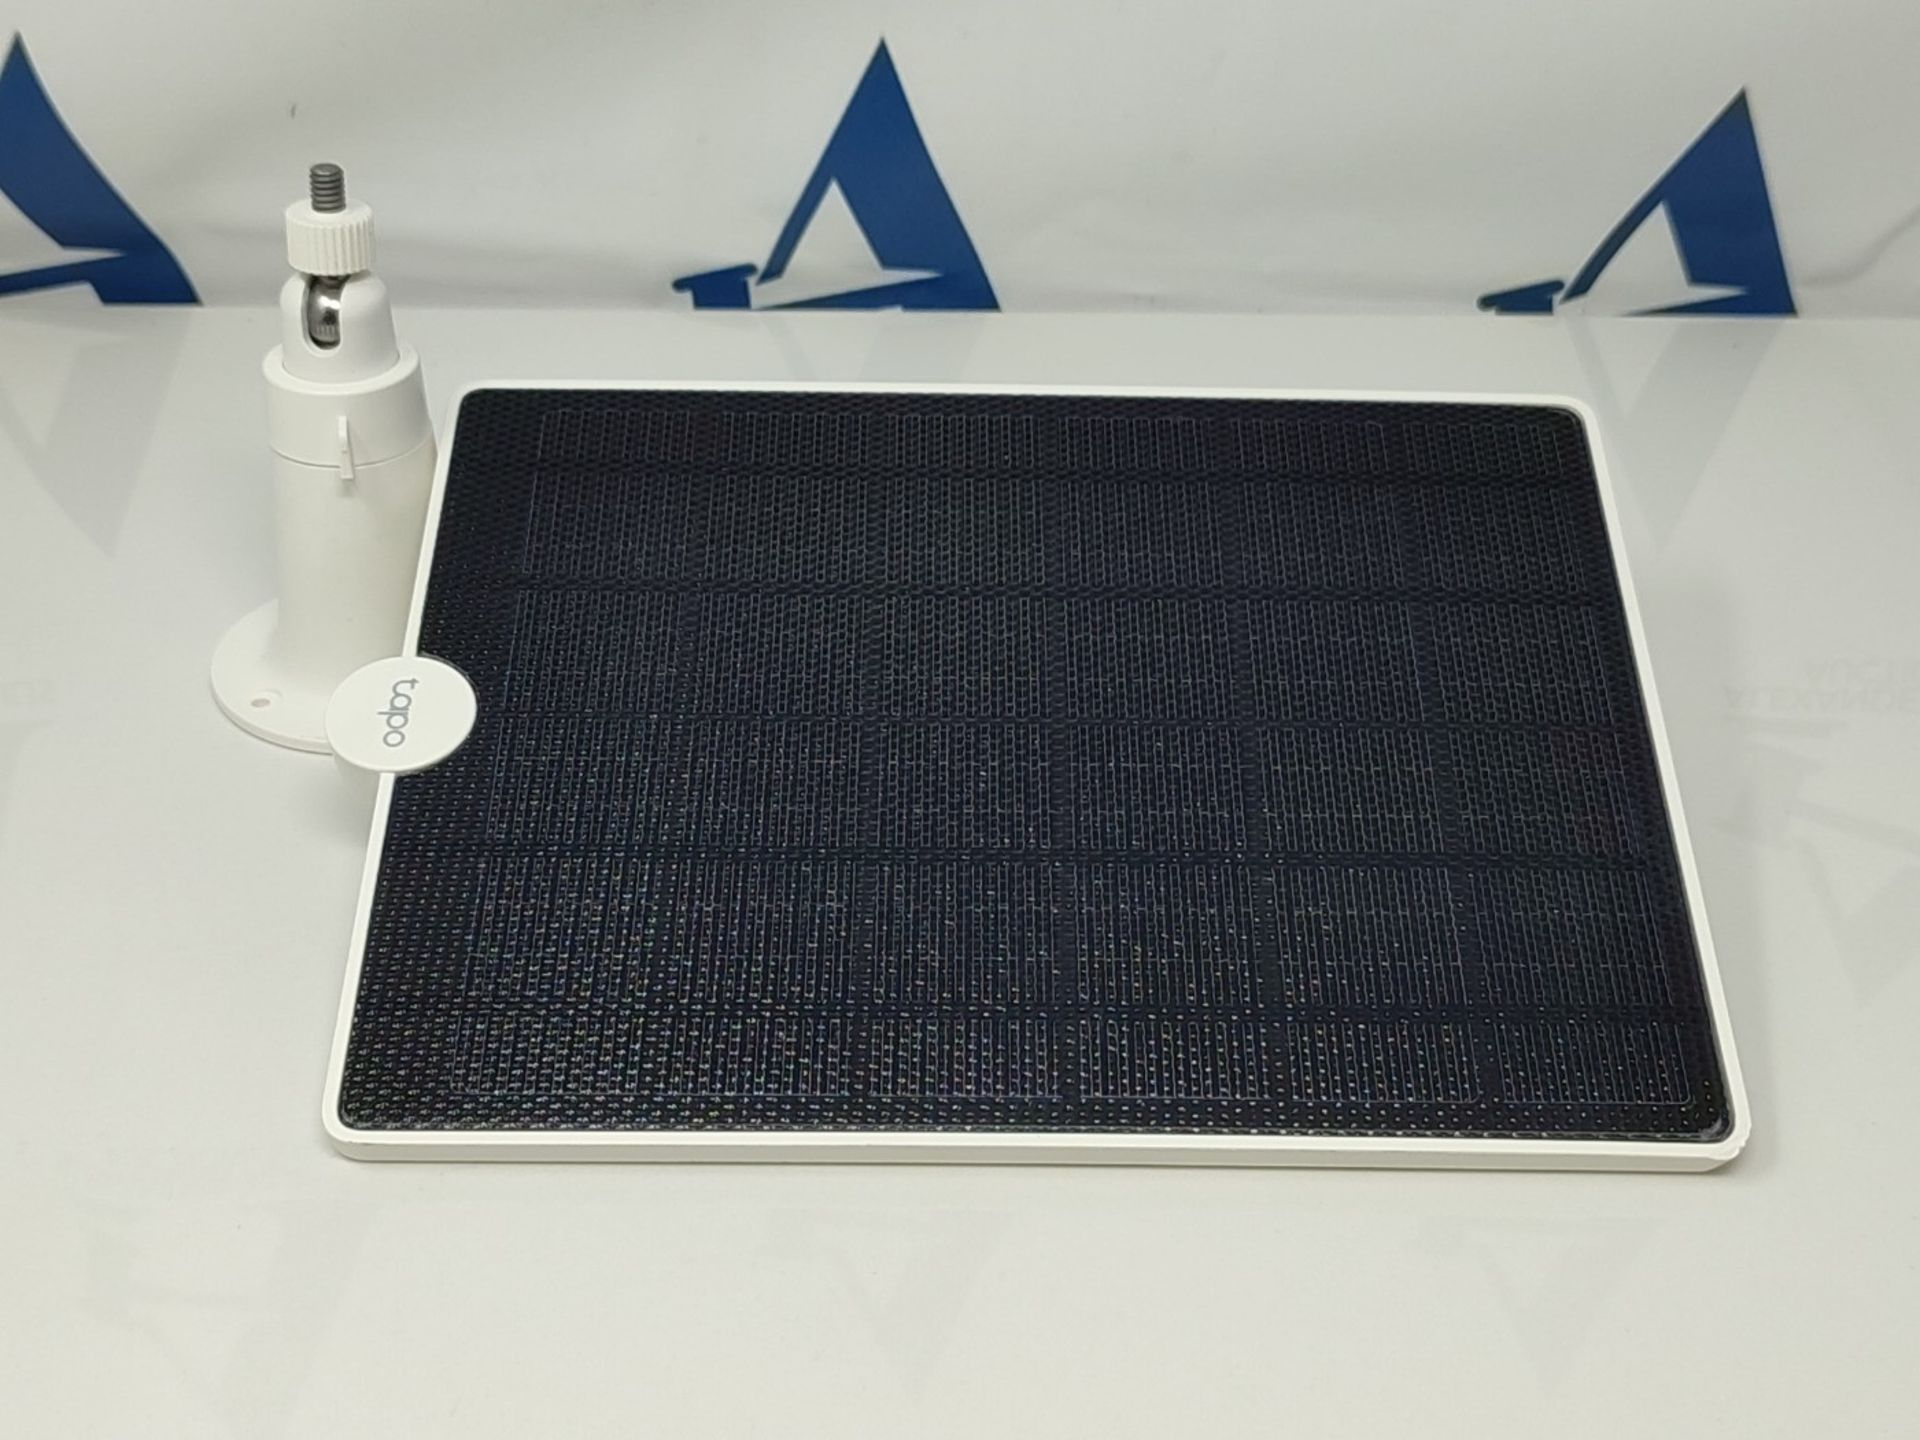 TP-Link Solar Panel, Non-Stop Solar Power, up to 4.5W Charging Power, IP65 Weatherproo - Image 3 of 3